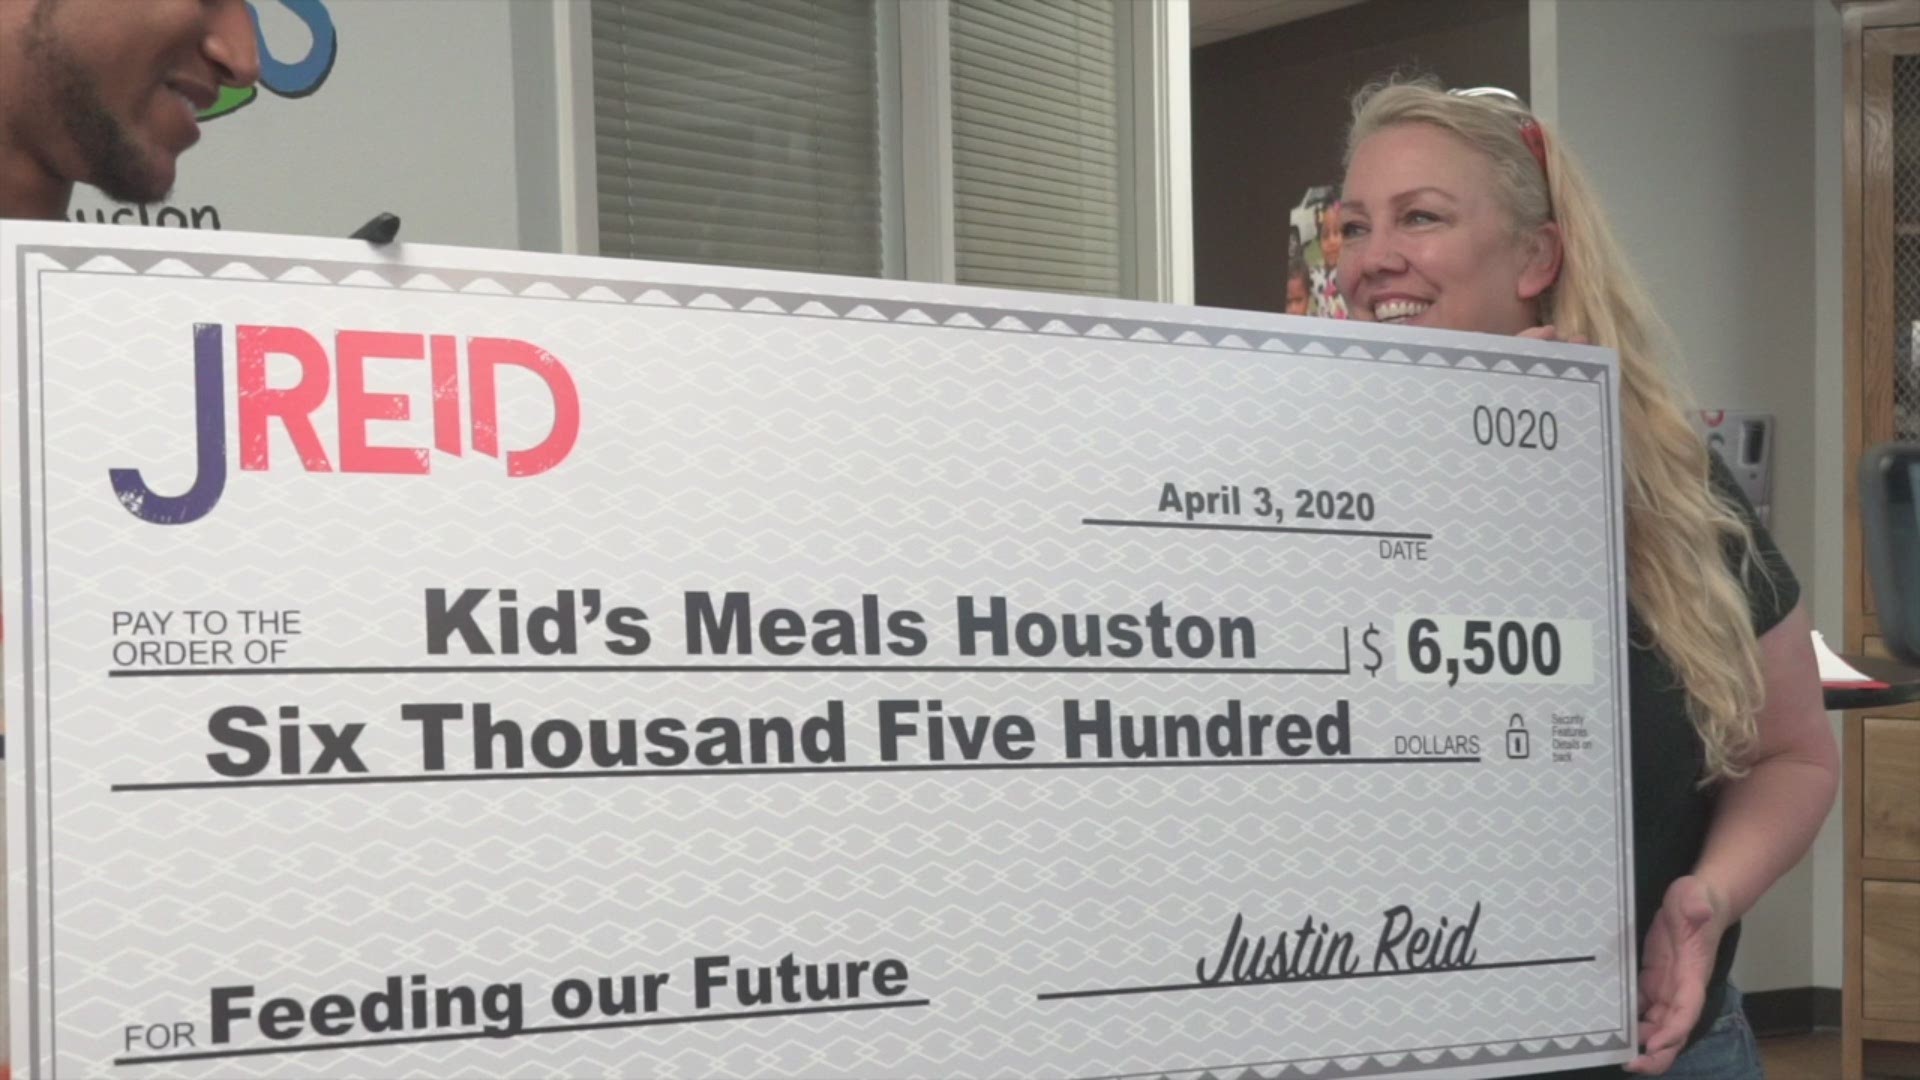 Houston Texans' Justin Reid donated $6,500 to Kids' Meals Houston to help children in need of food during the COVID-19 crisis.